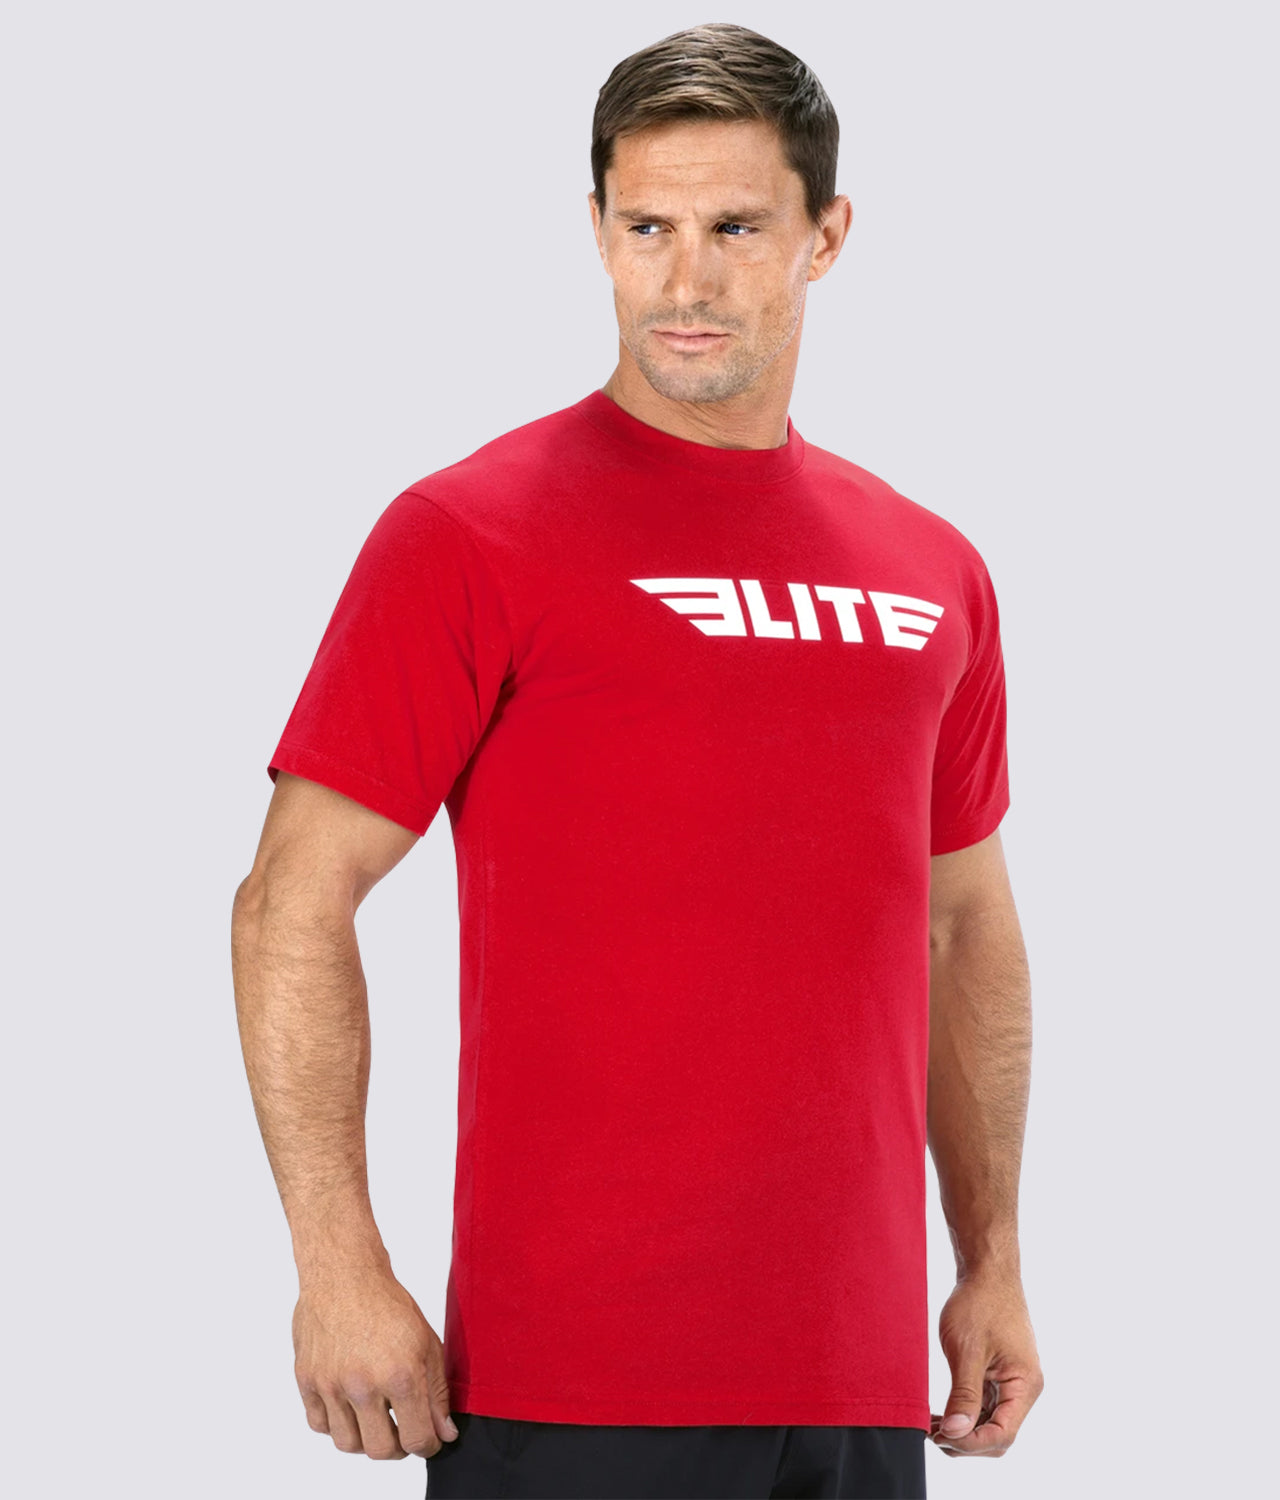 Elite Sports Athletic Fit Red Cross Fit T-Shirts